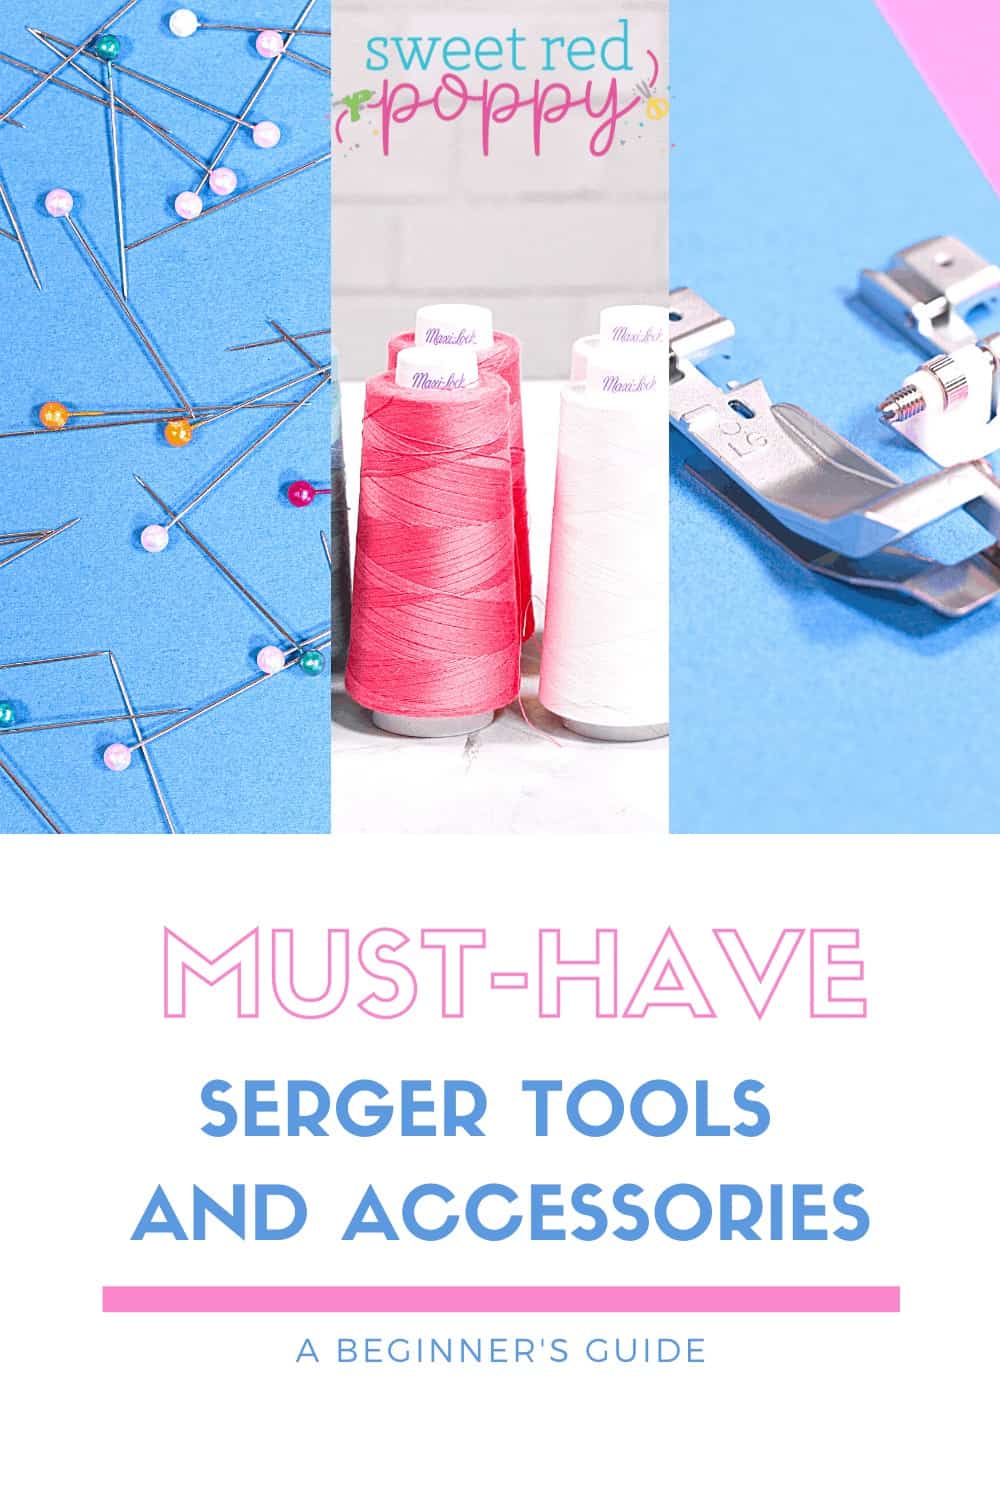 Sewing Gadgets - Buy Useful Gadgets